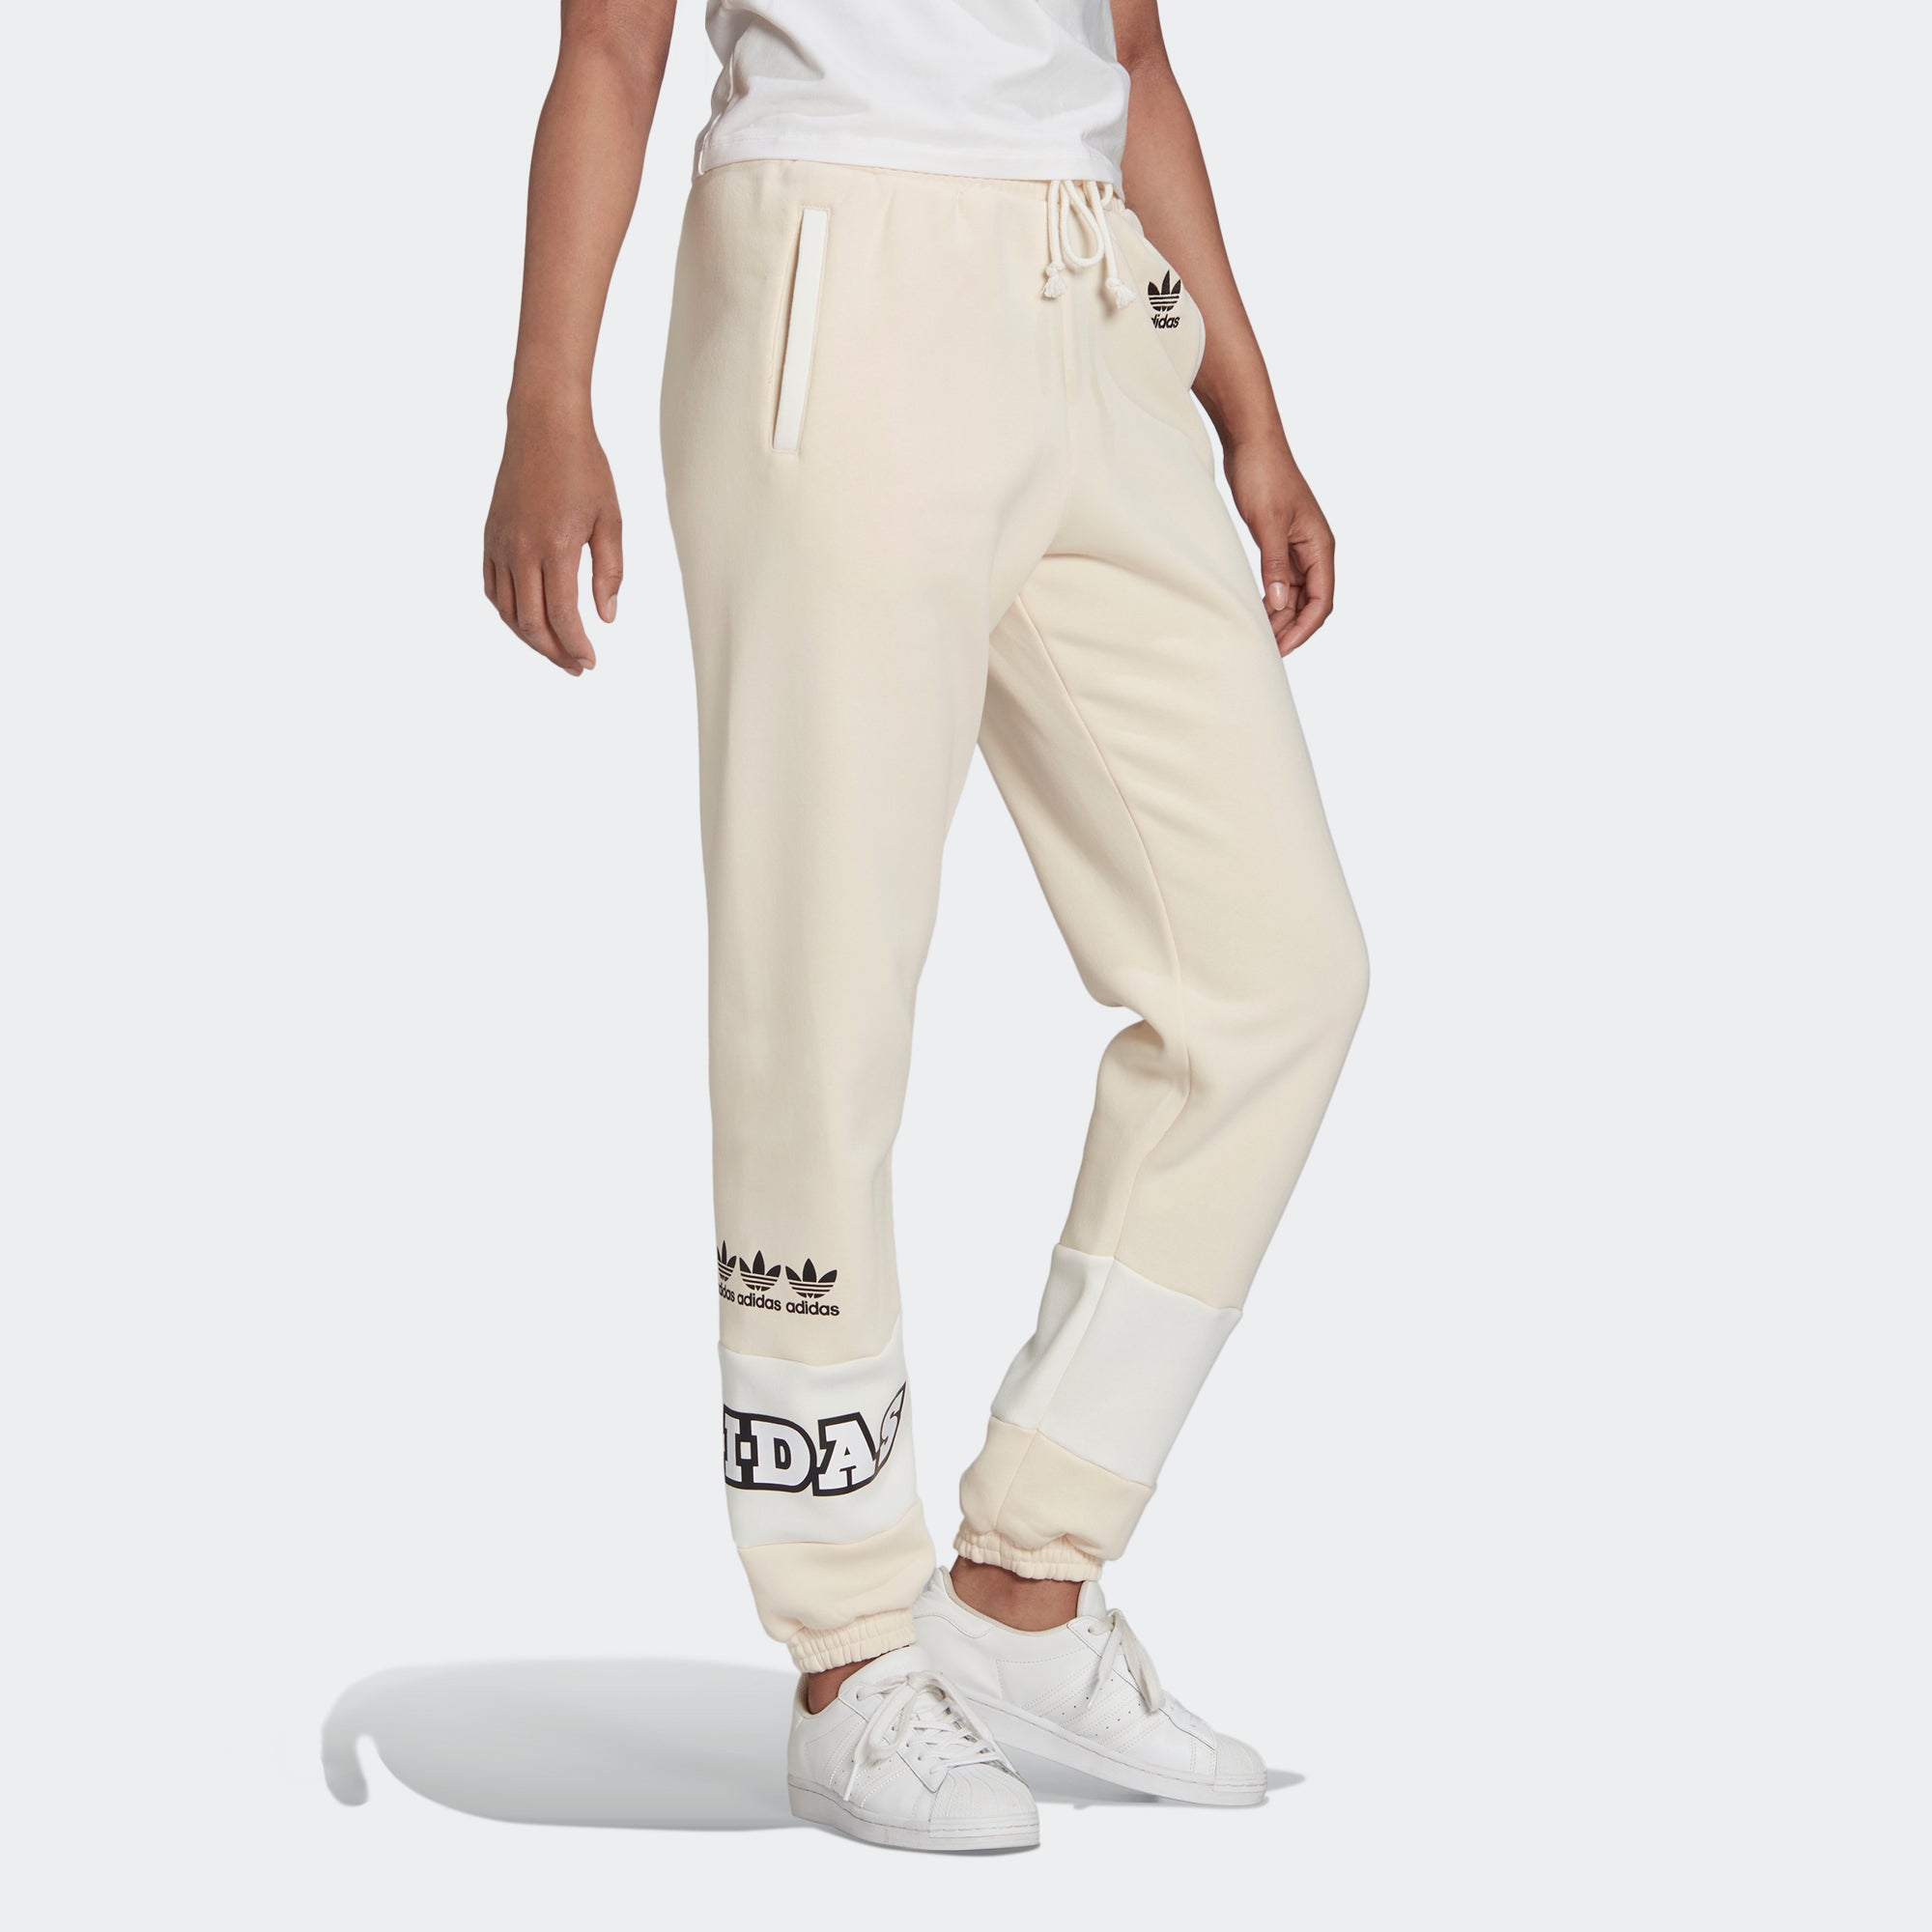 adidas Originals Women's Laced High-Waisted Pants H20229